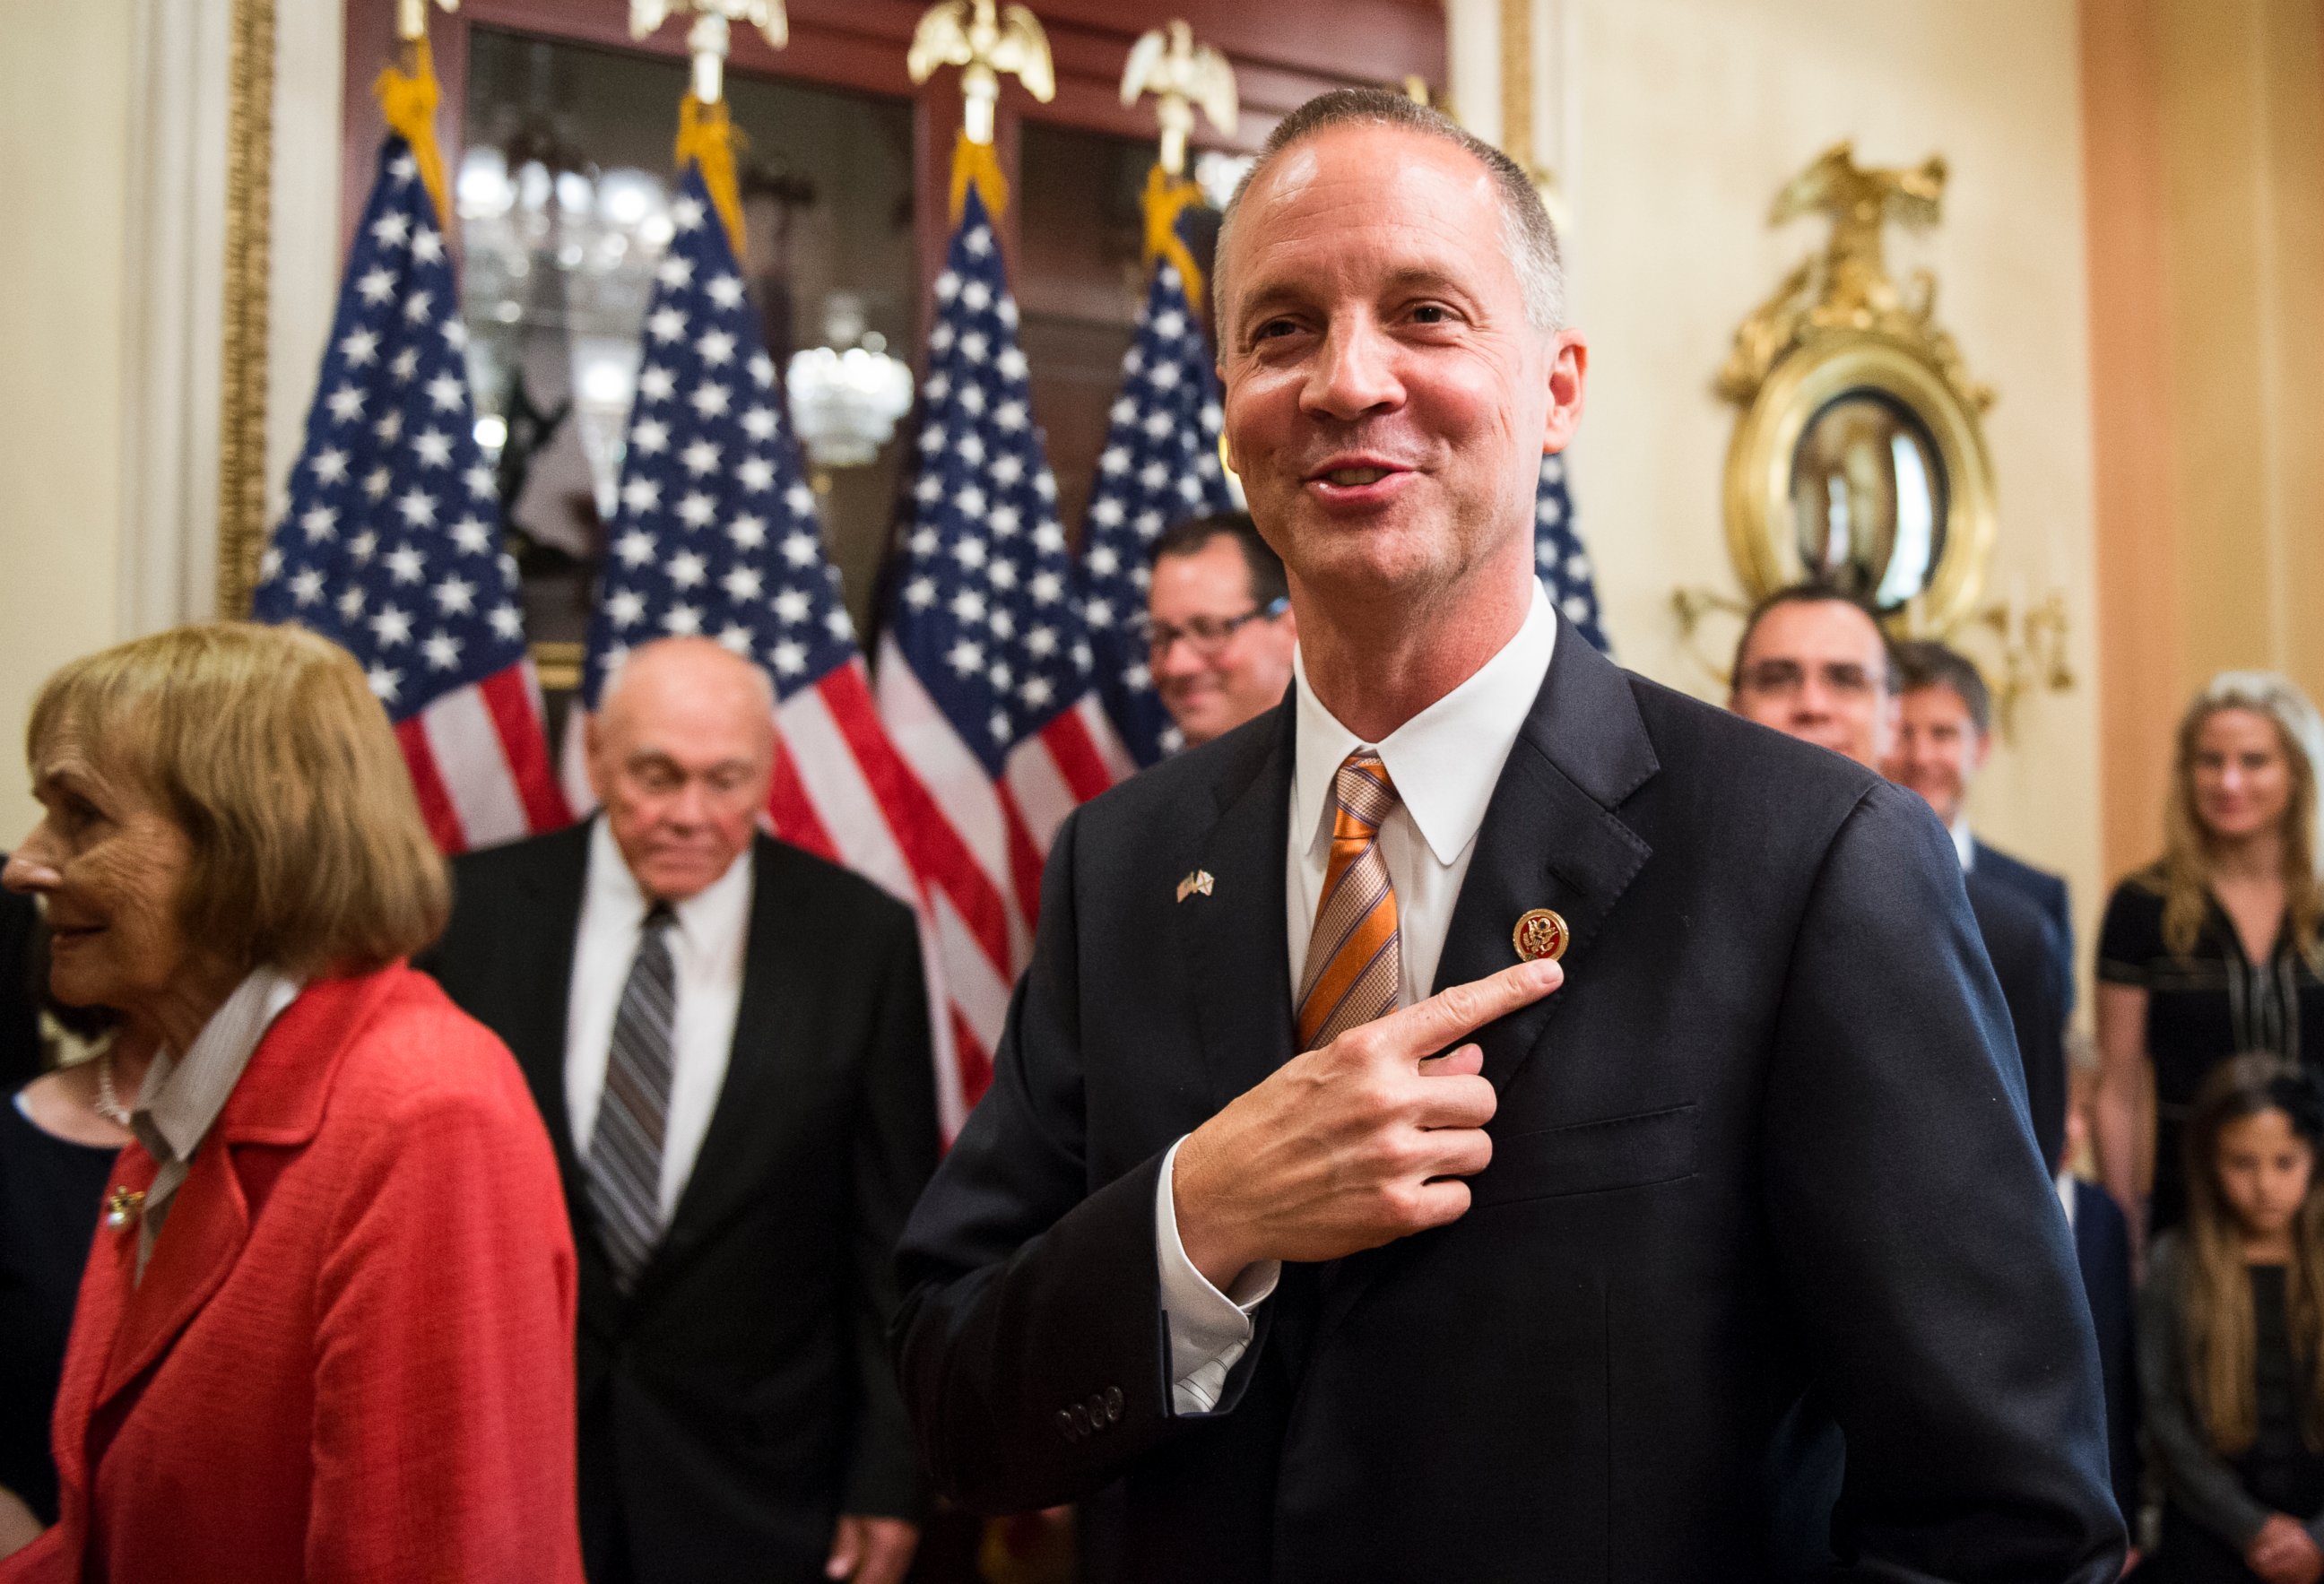 PHOTO: Curt Clawson points to his member pin after the ceremonial swearing-in photo opportunity in the Capitol on June 25, 2014.